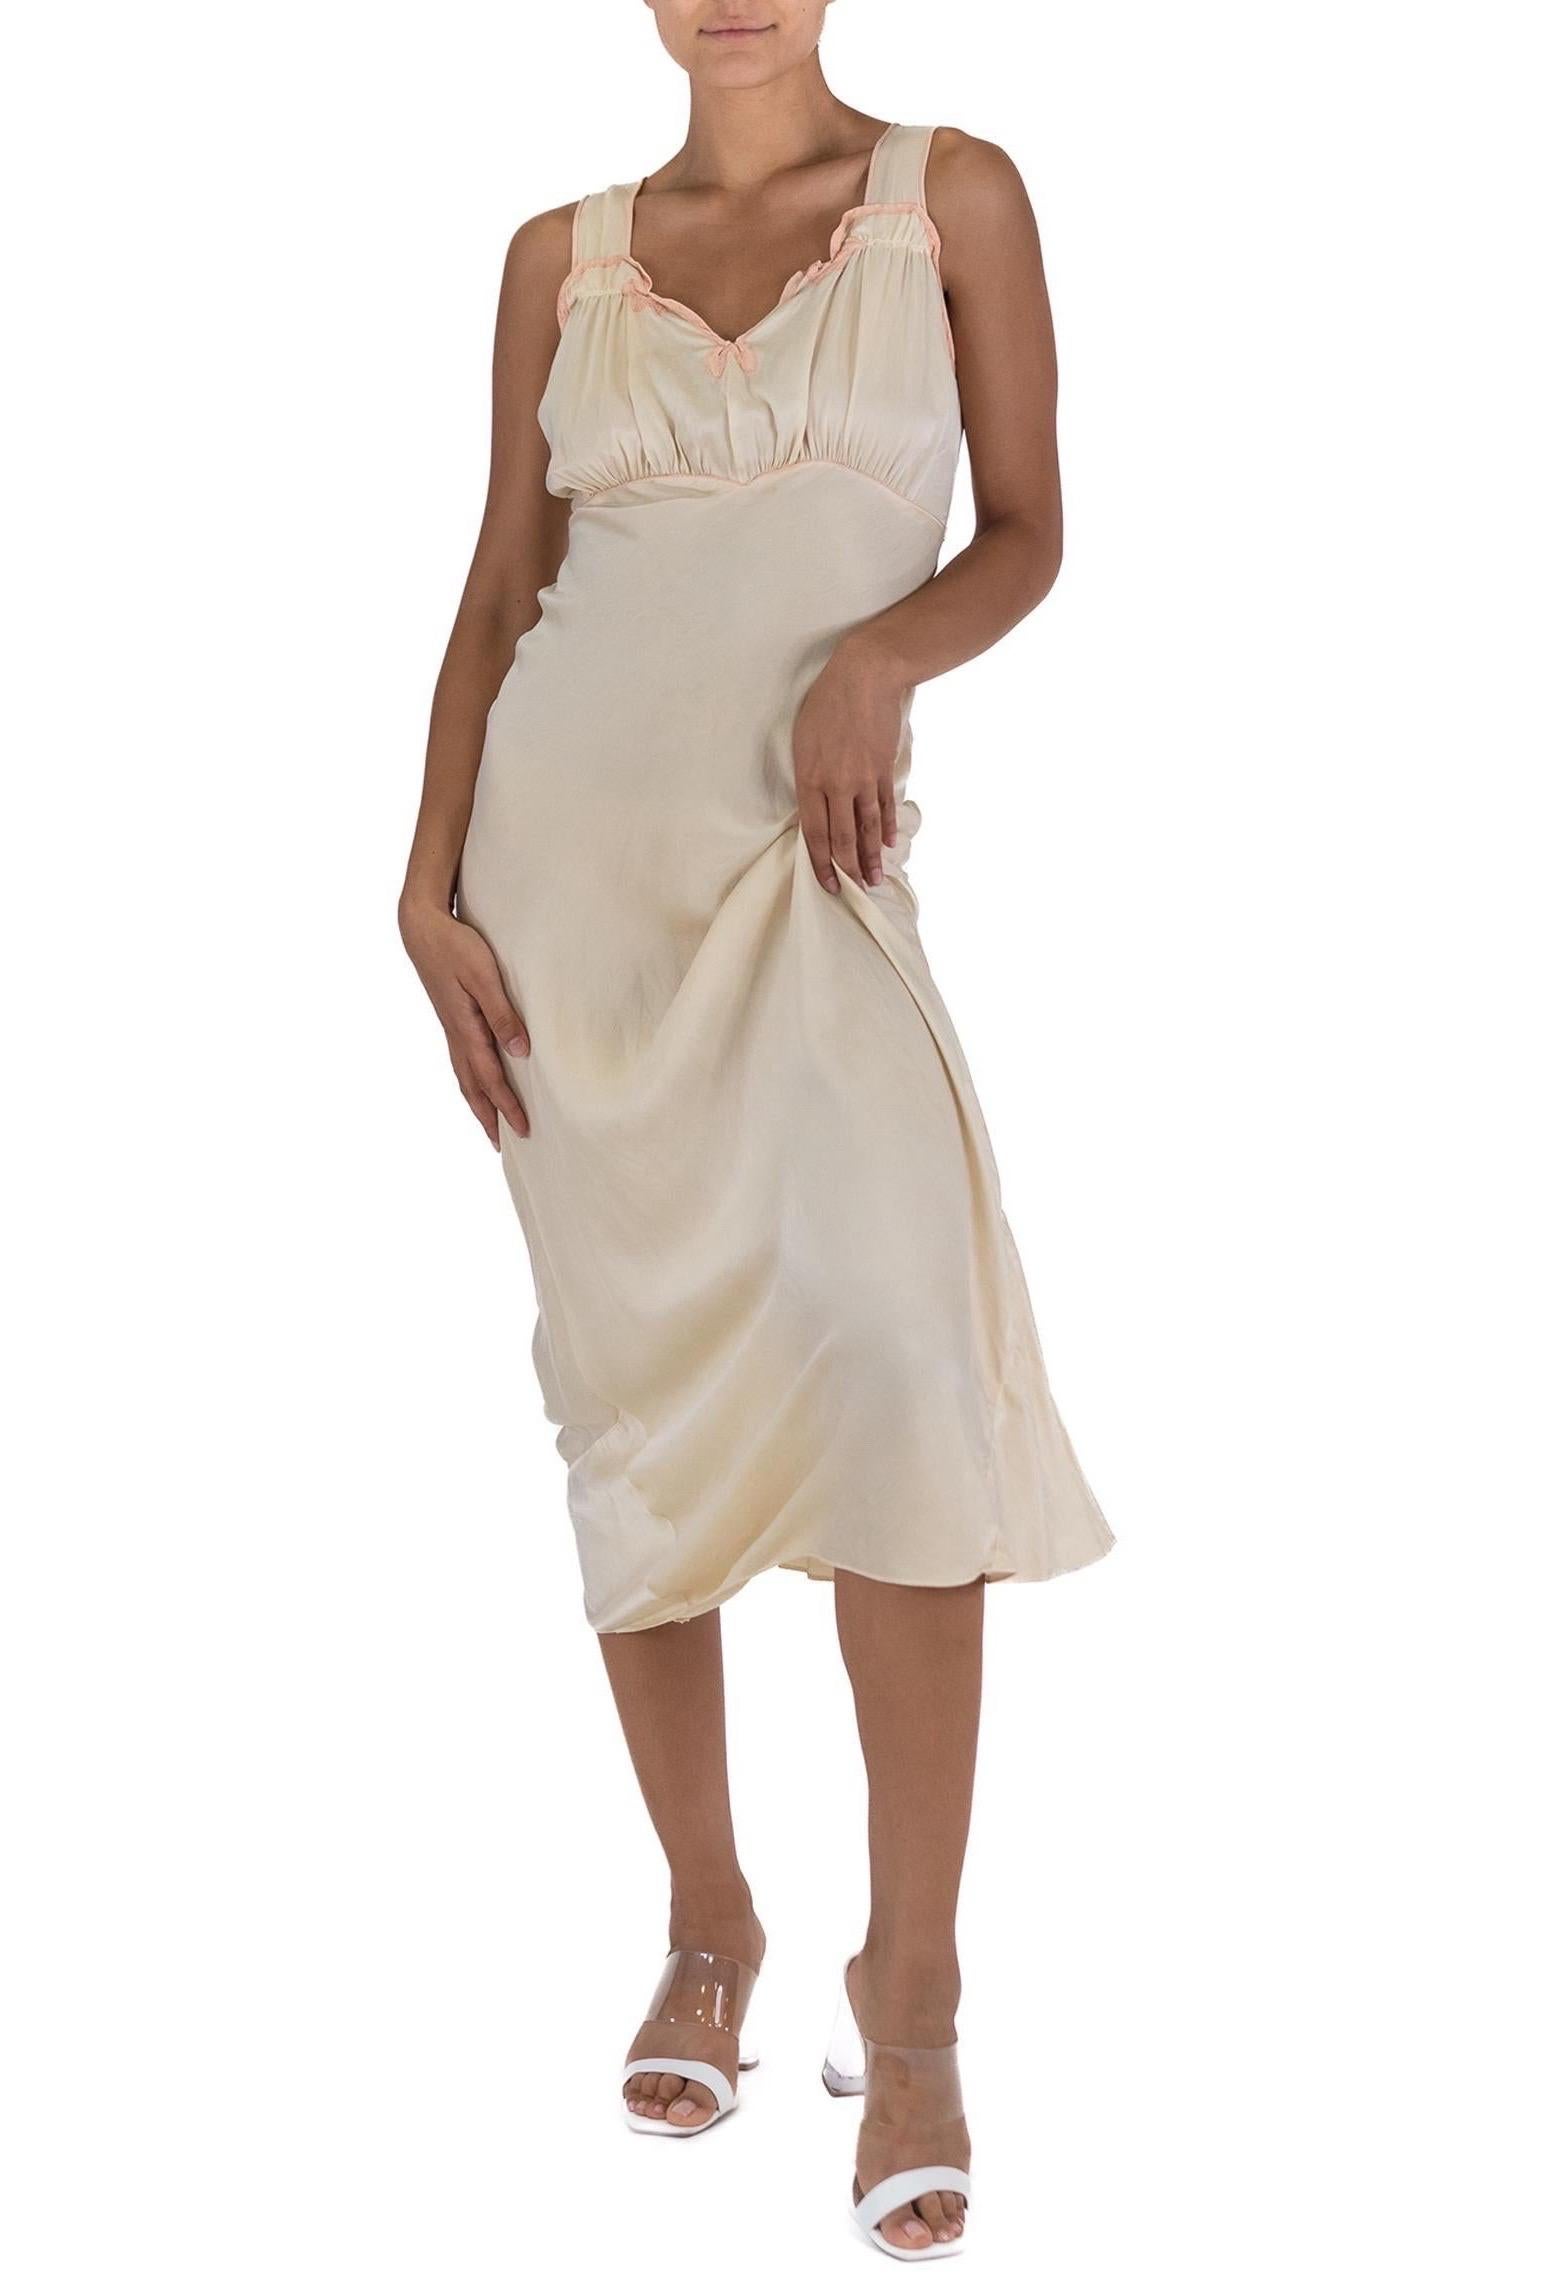 1930S Cream Bias Cut Silk Negligee With Blusk Pink Trim Detailing For Sale 2